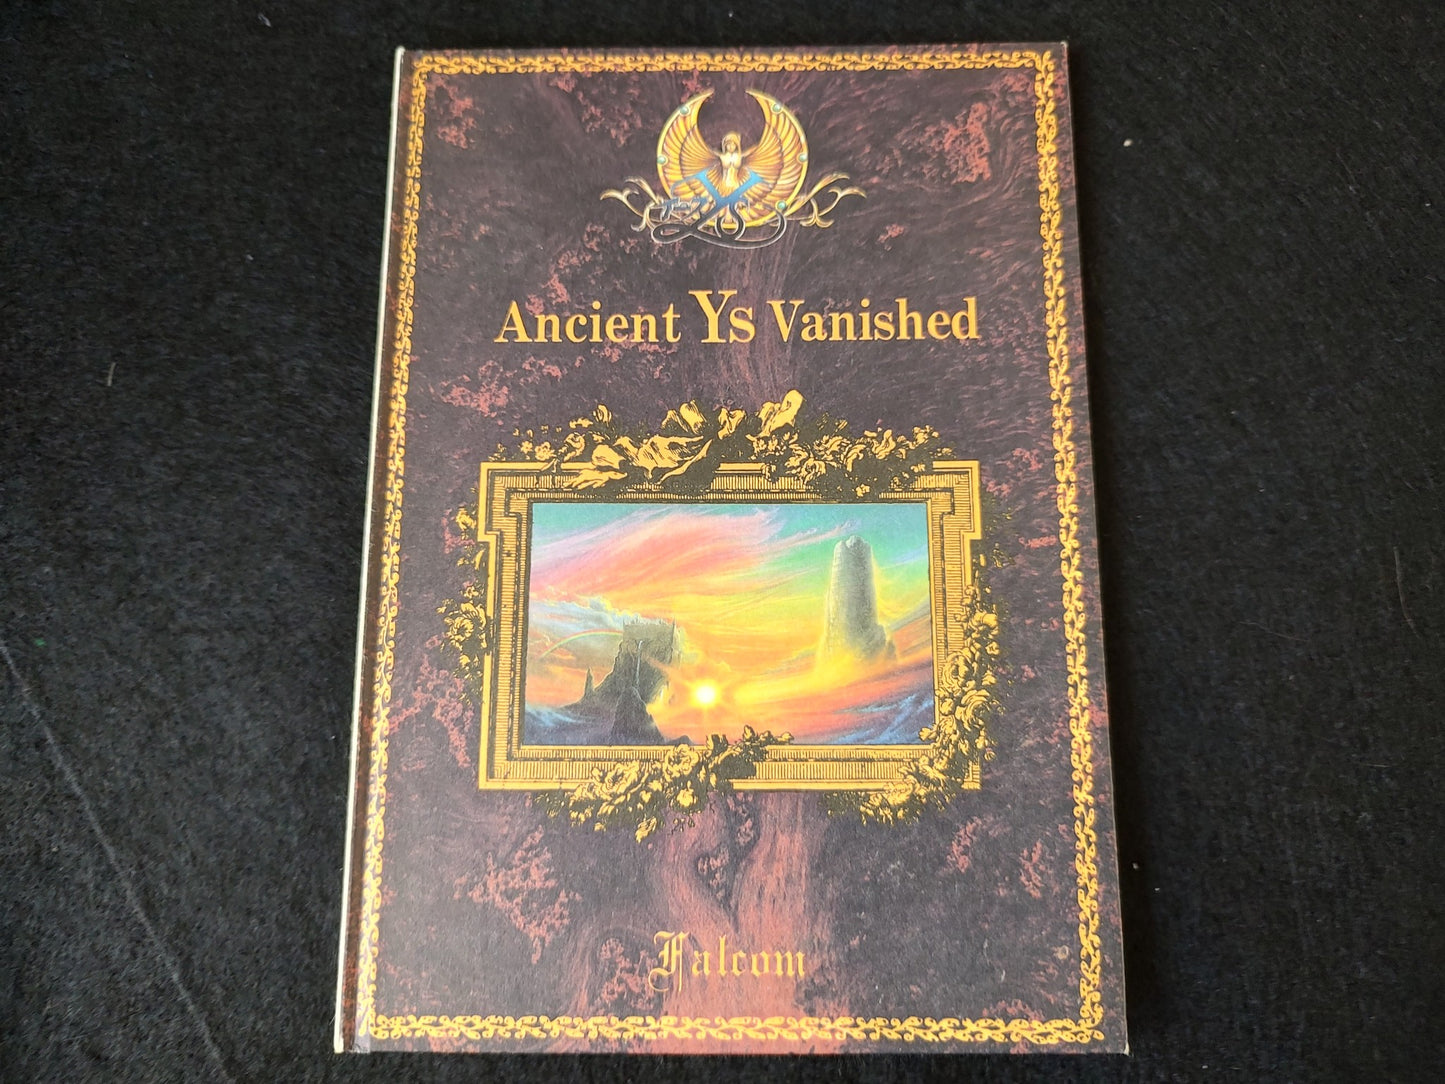 Ys - Ancient Ys Vanished - MSX MSX2 Game Disk,Manual, Boxed tested-f0617-2